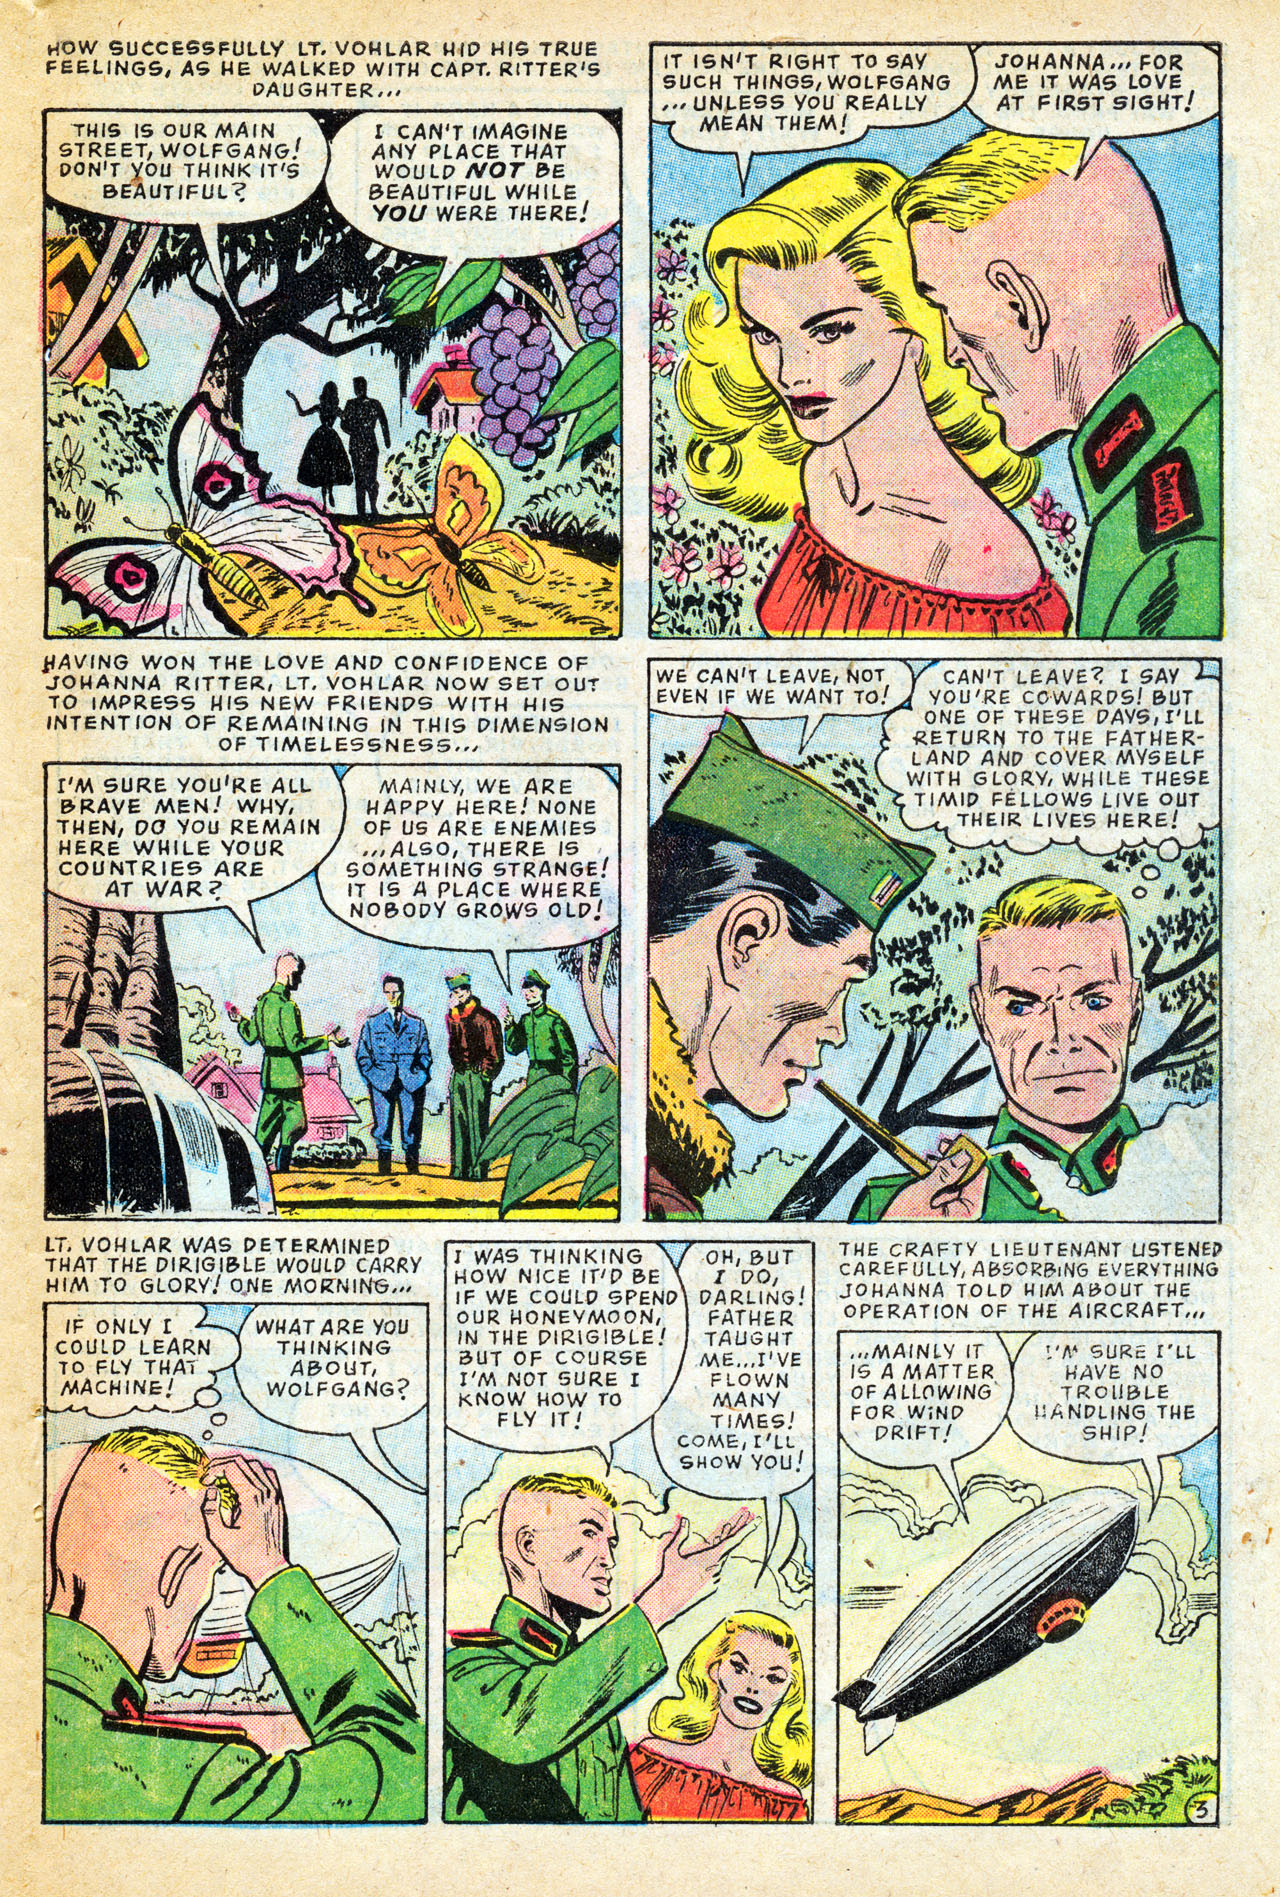 Marvel Tales (1949) 151 Page 14